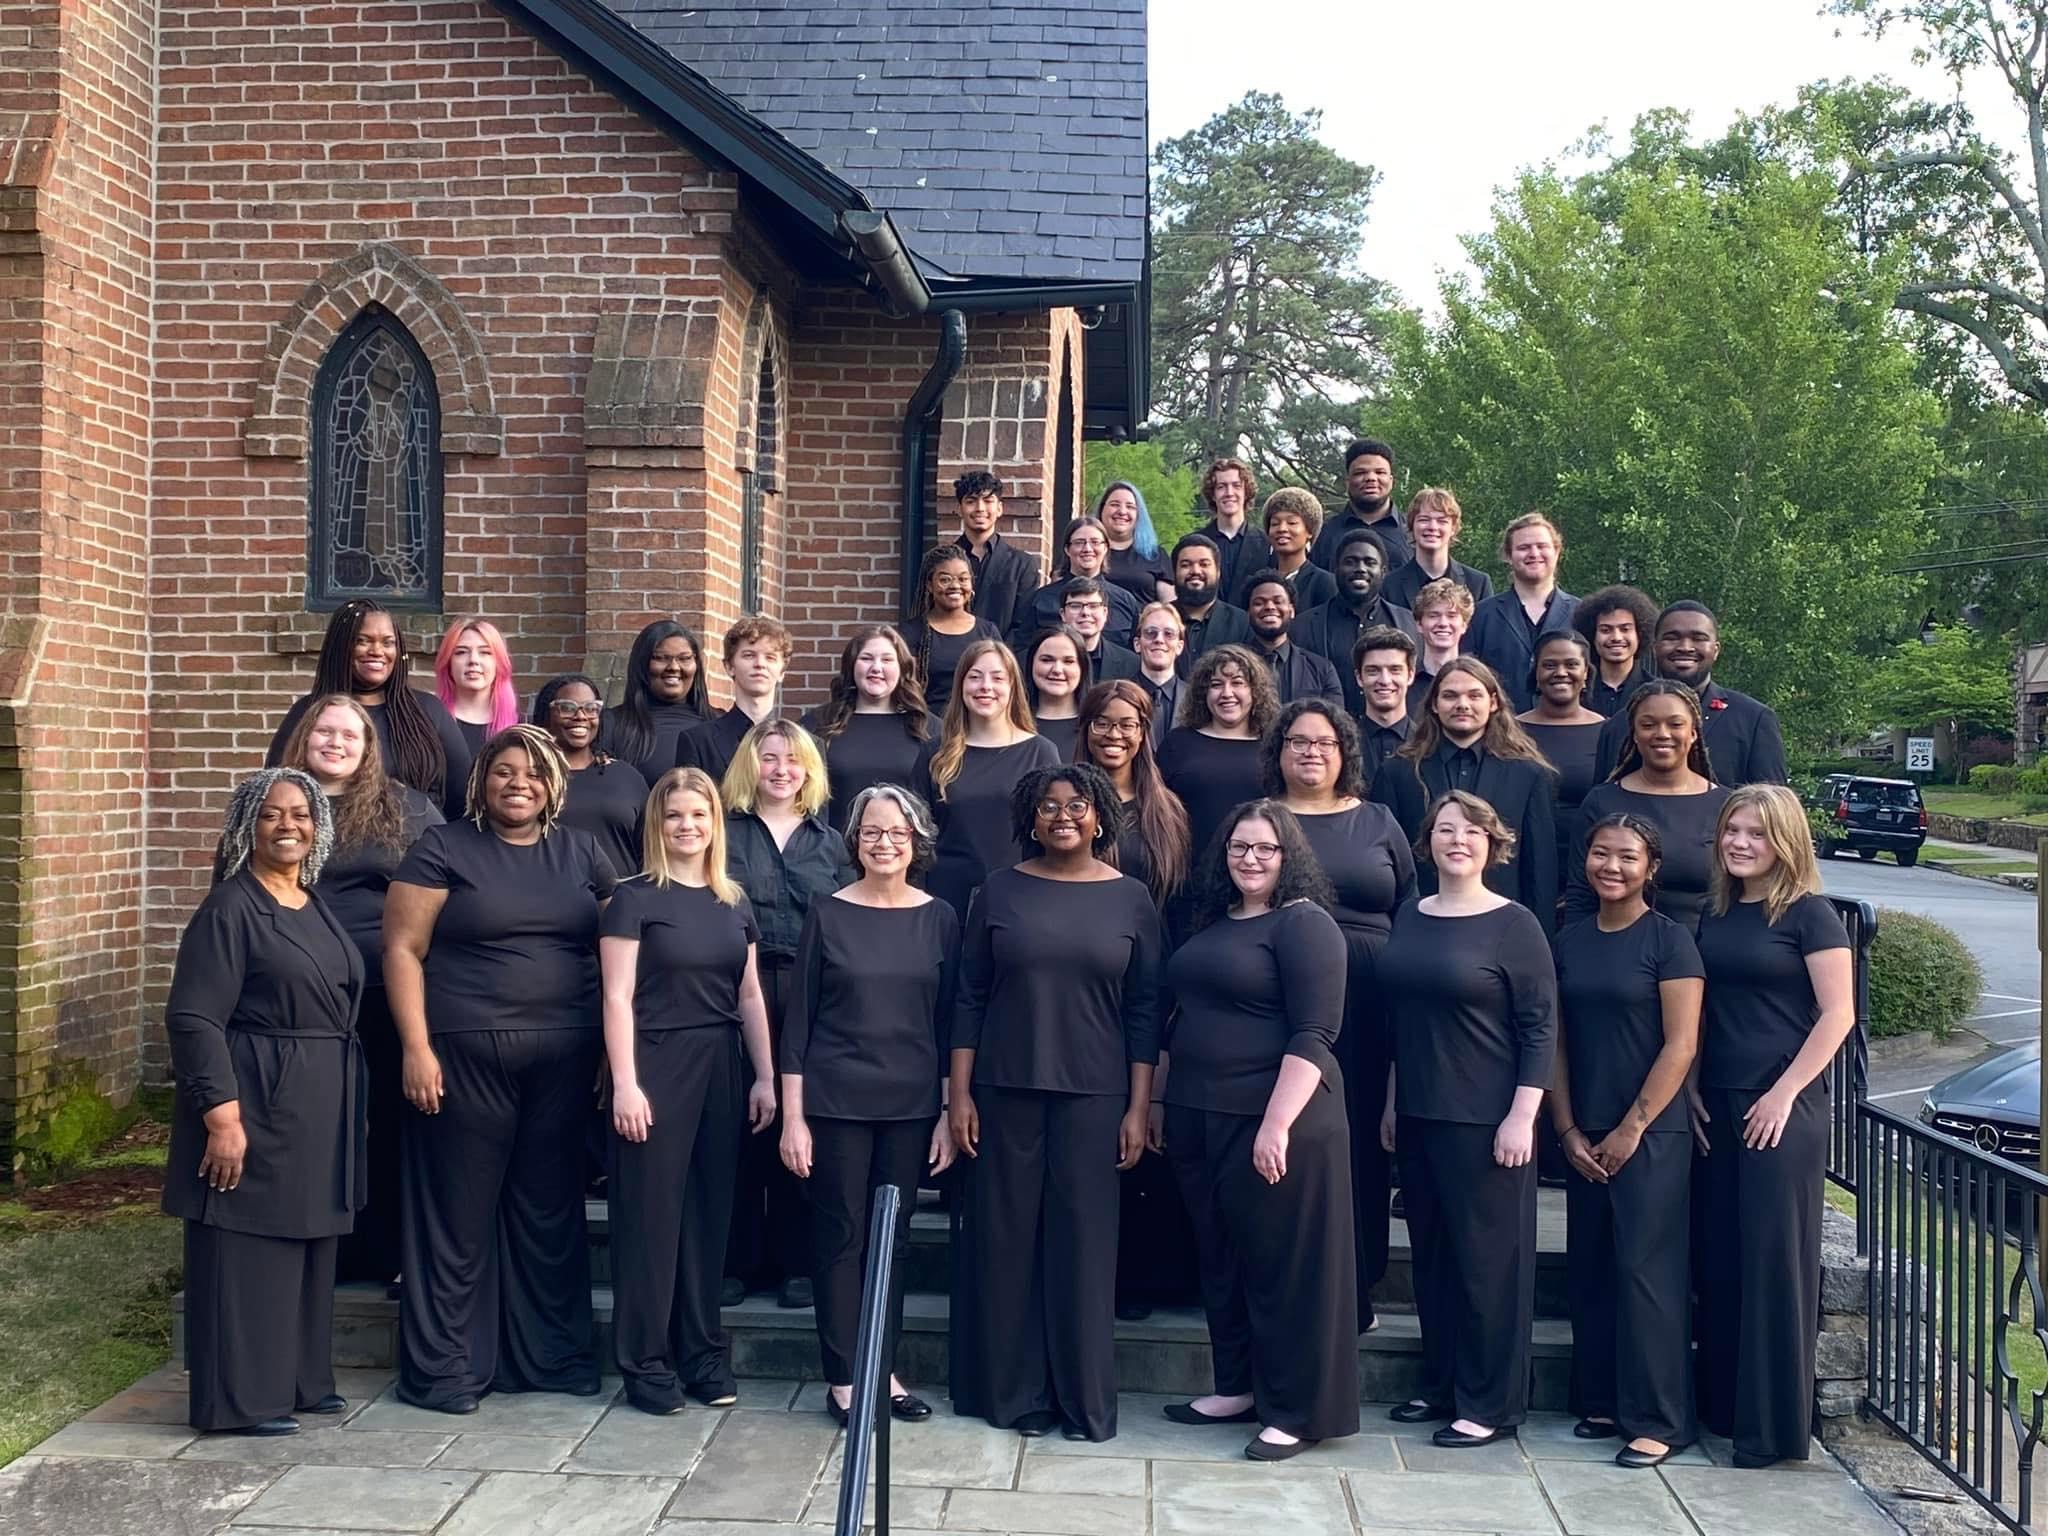 Choir students pose in a line outside of a church for a photo.